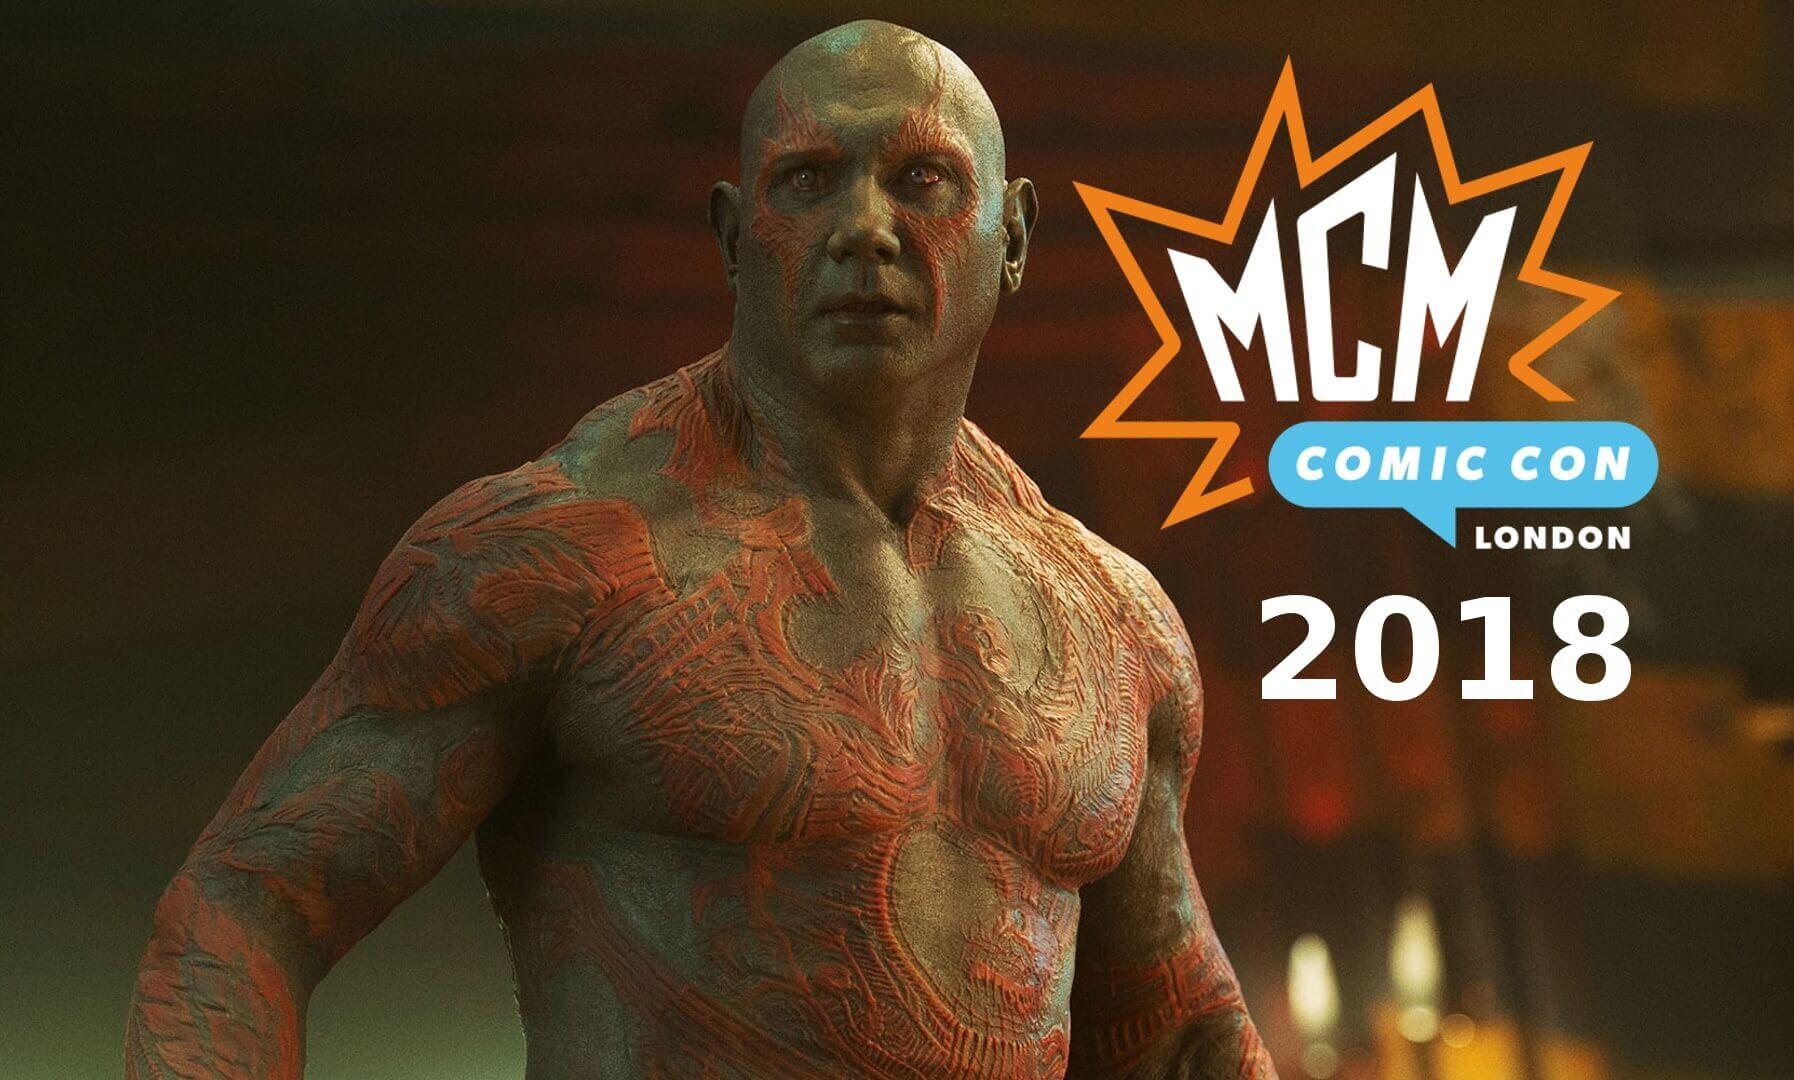 MCM ComicCon 2018 London: Dave Bautista, first guest Cosplay